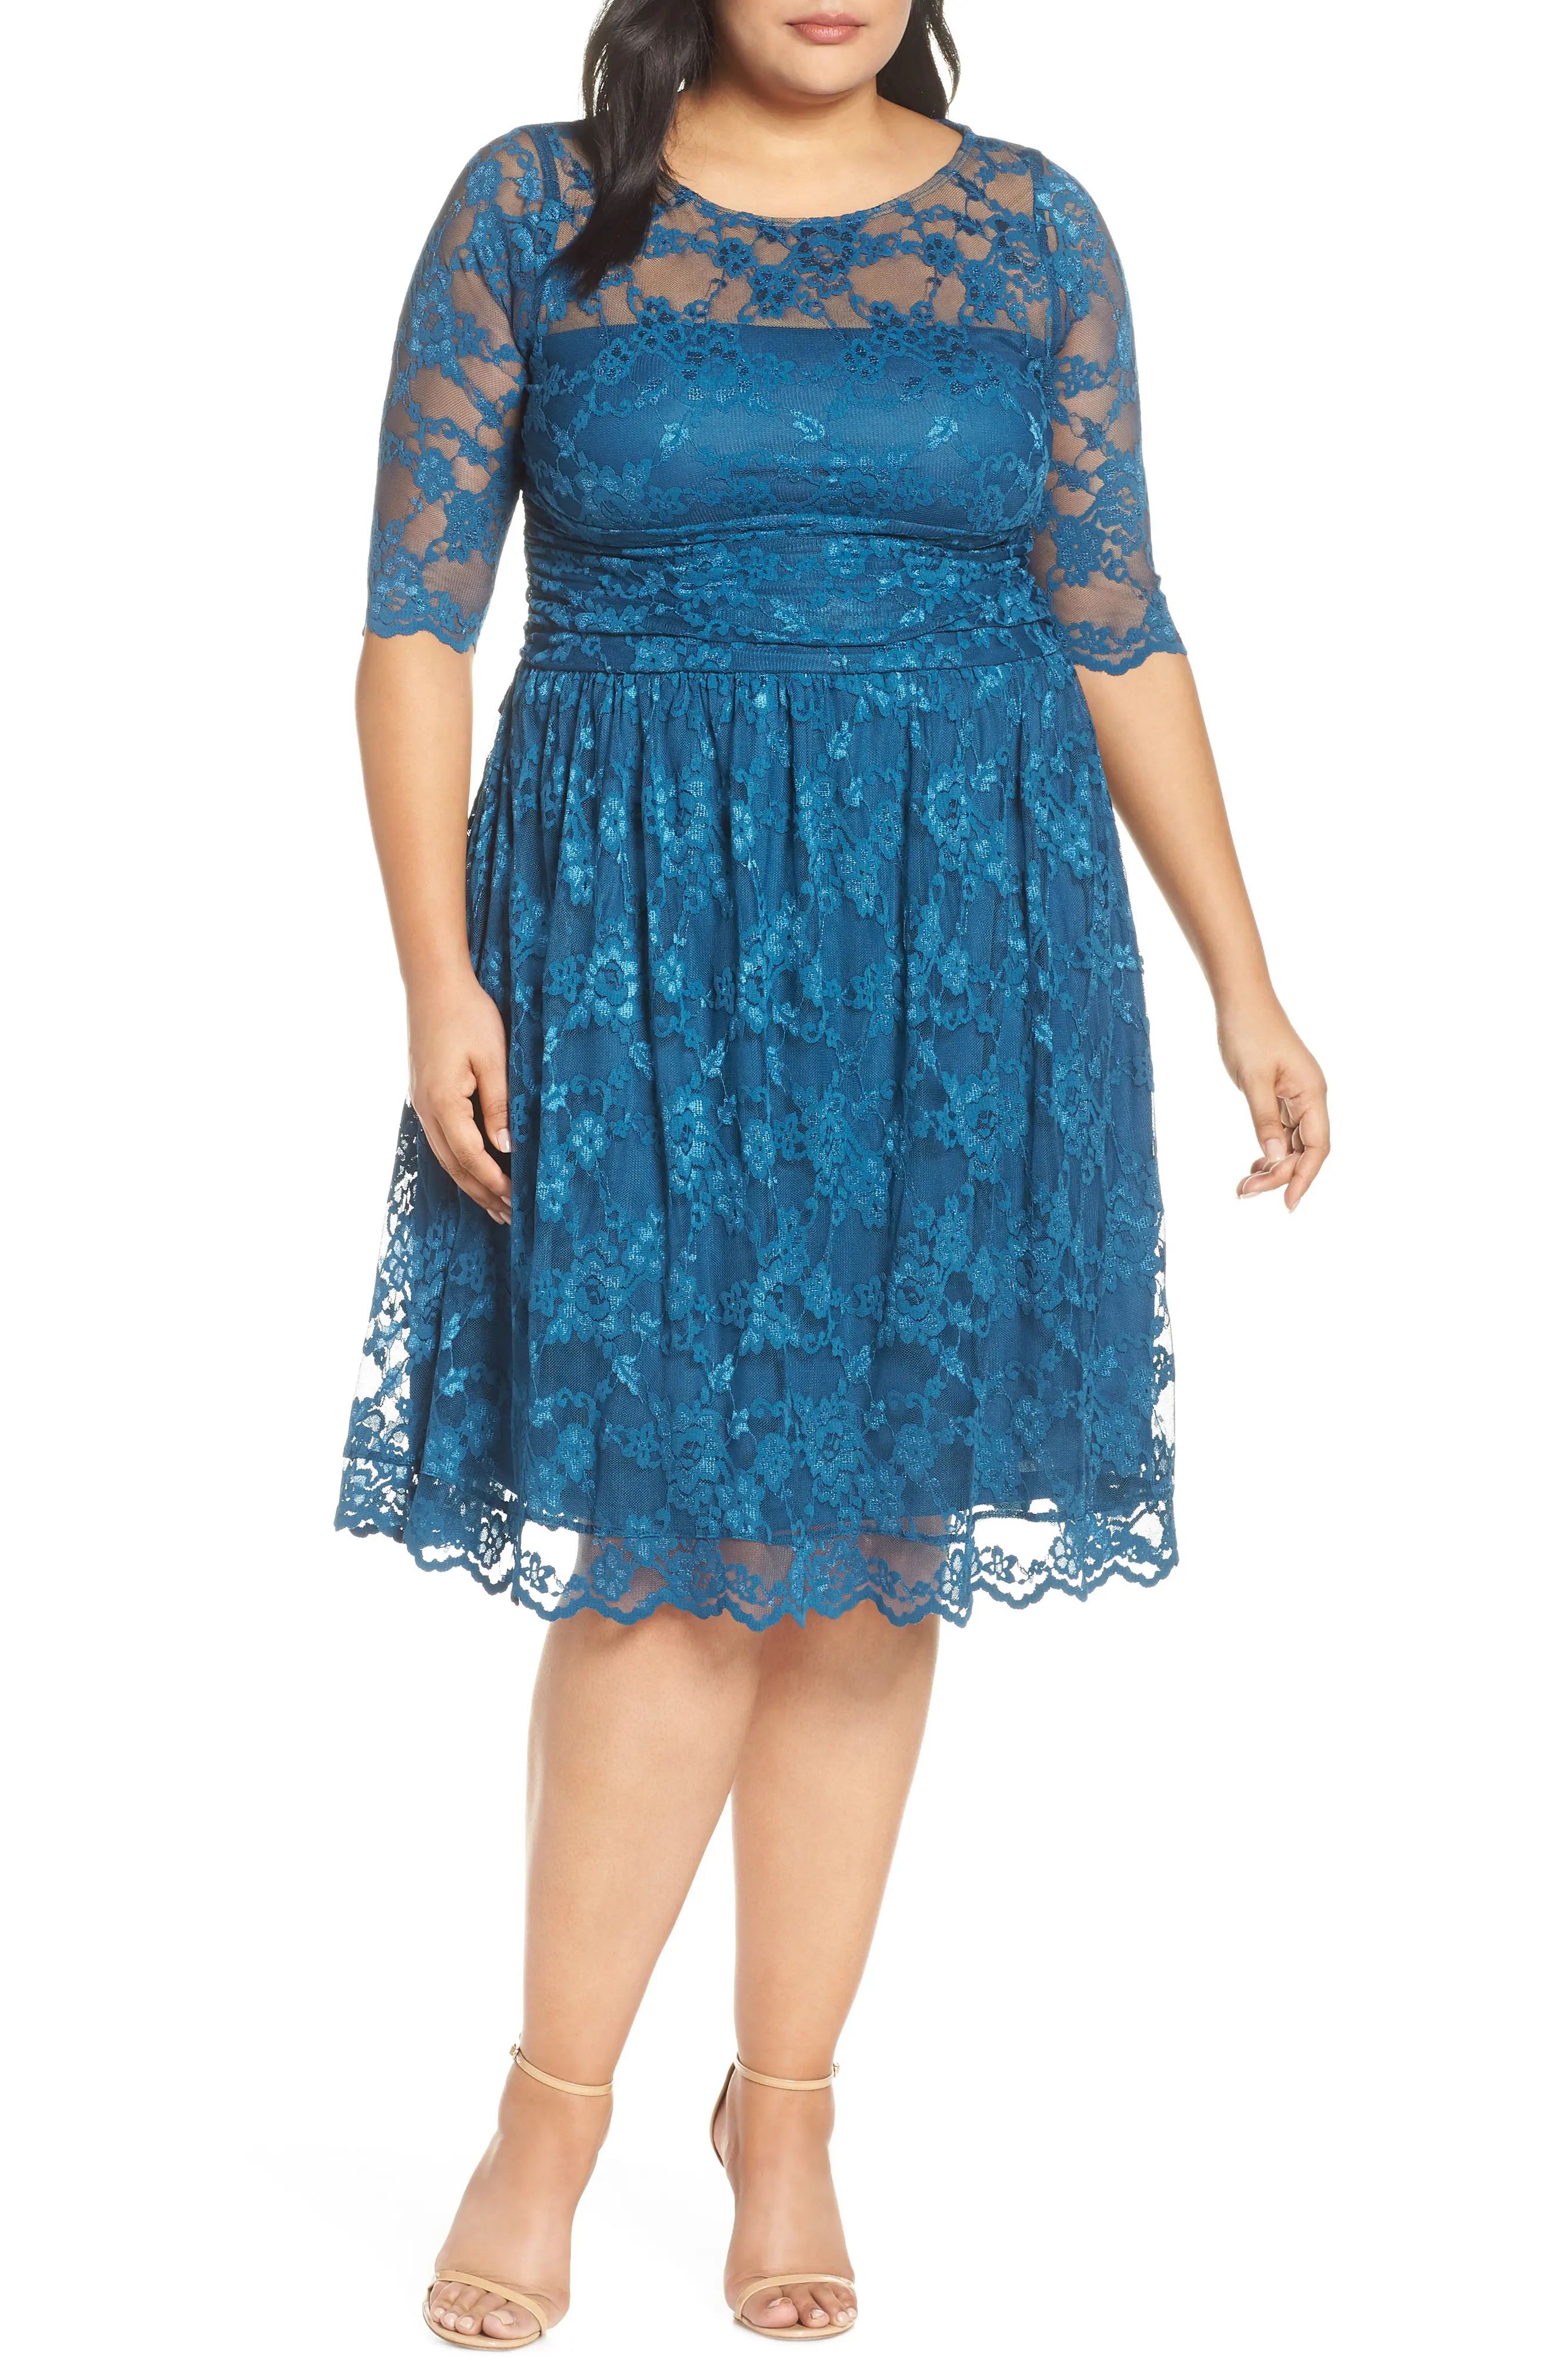 Kiyonna Luna Lace A-Line Dress, Size 0X in Crazy About Blue at Nordstrom | Nordstrom